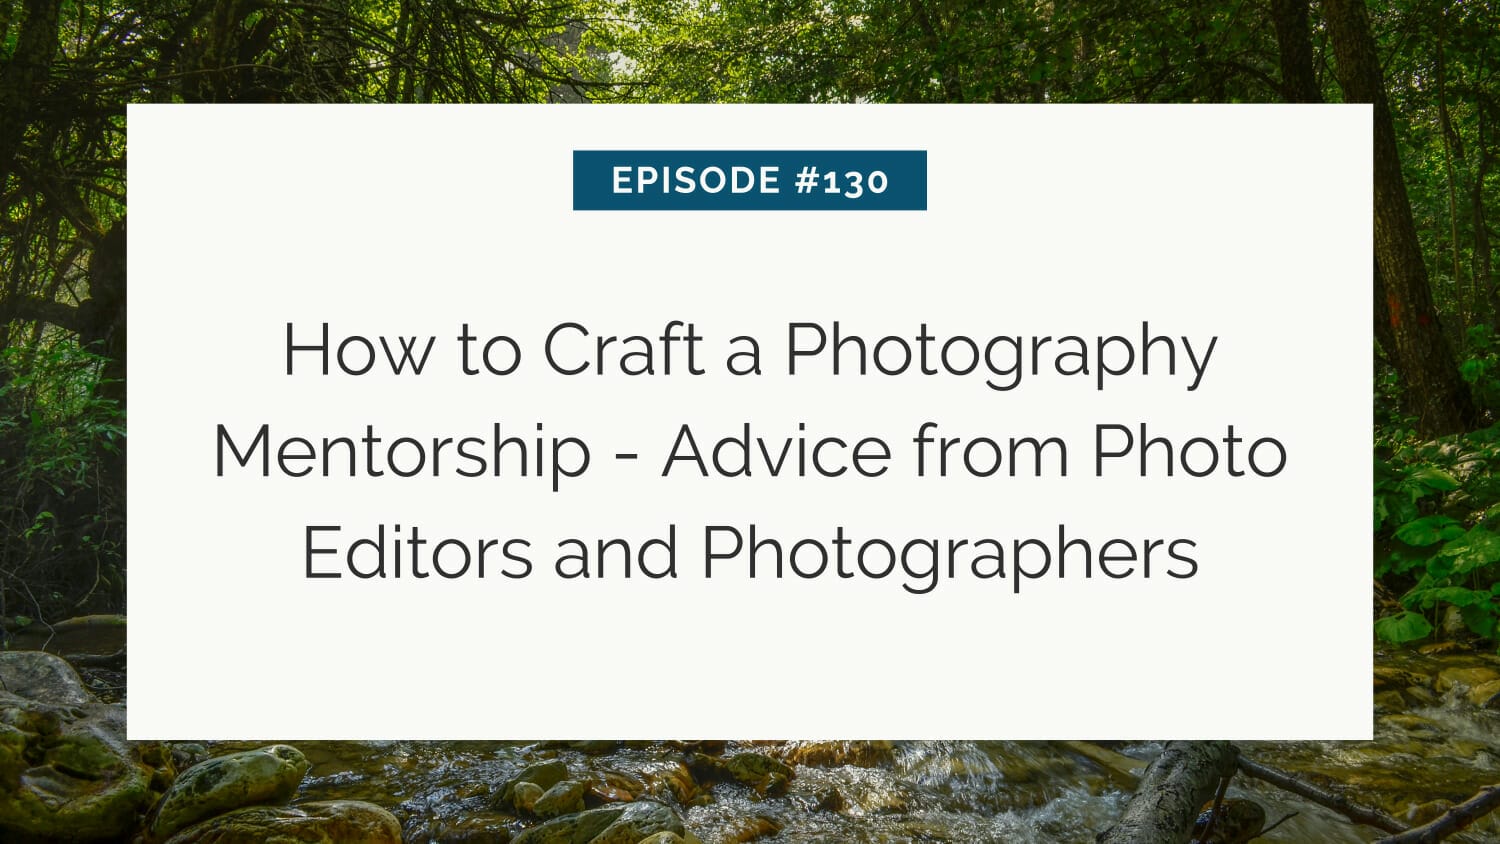 Seminar banner on photography mentorship featuring advice from photo editors and photographers.